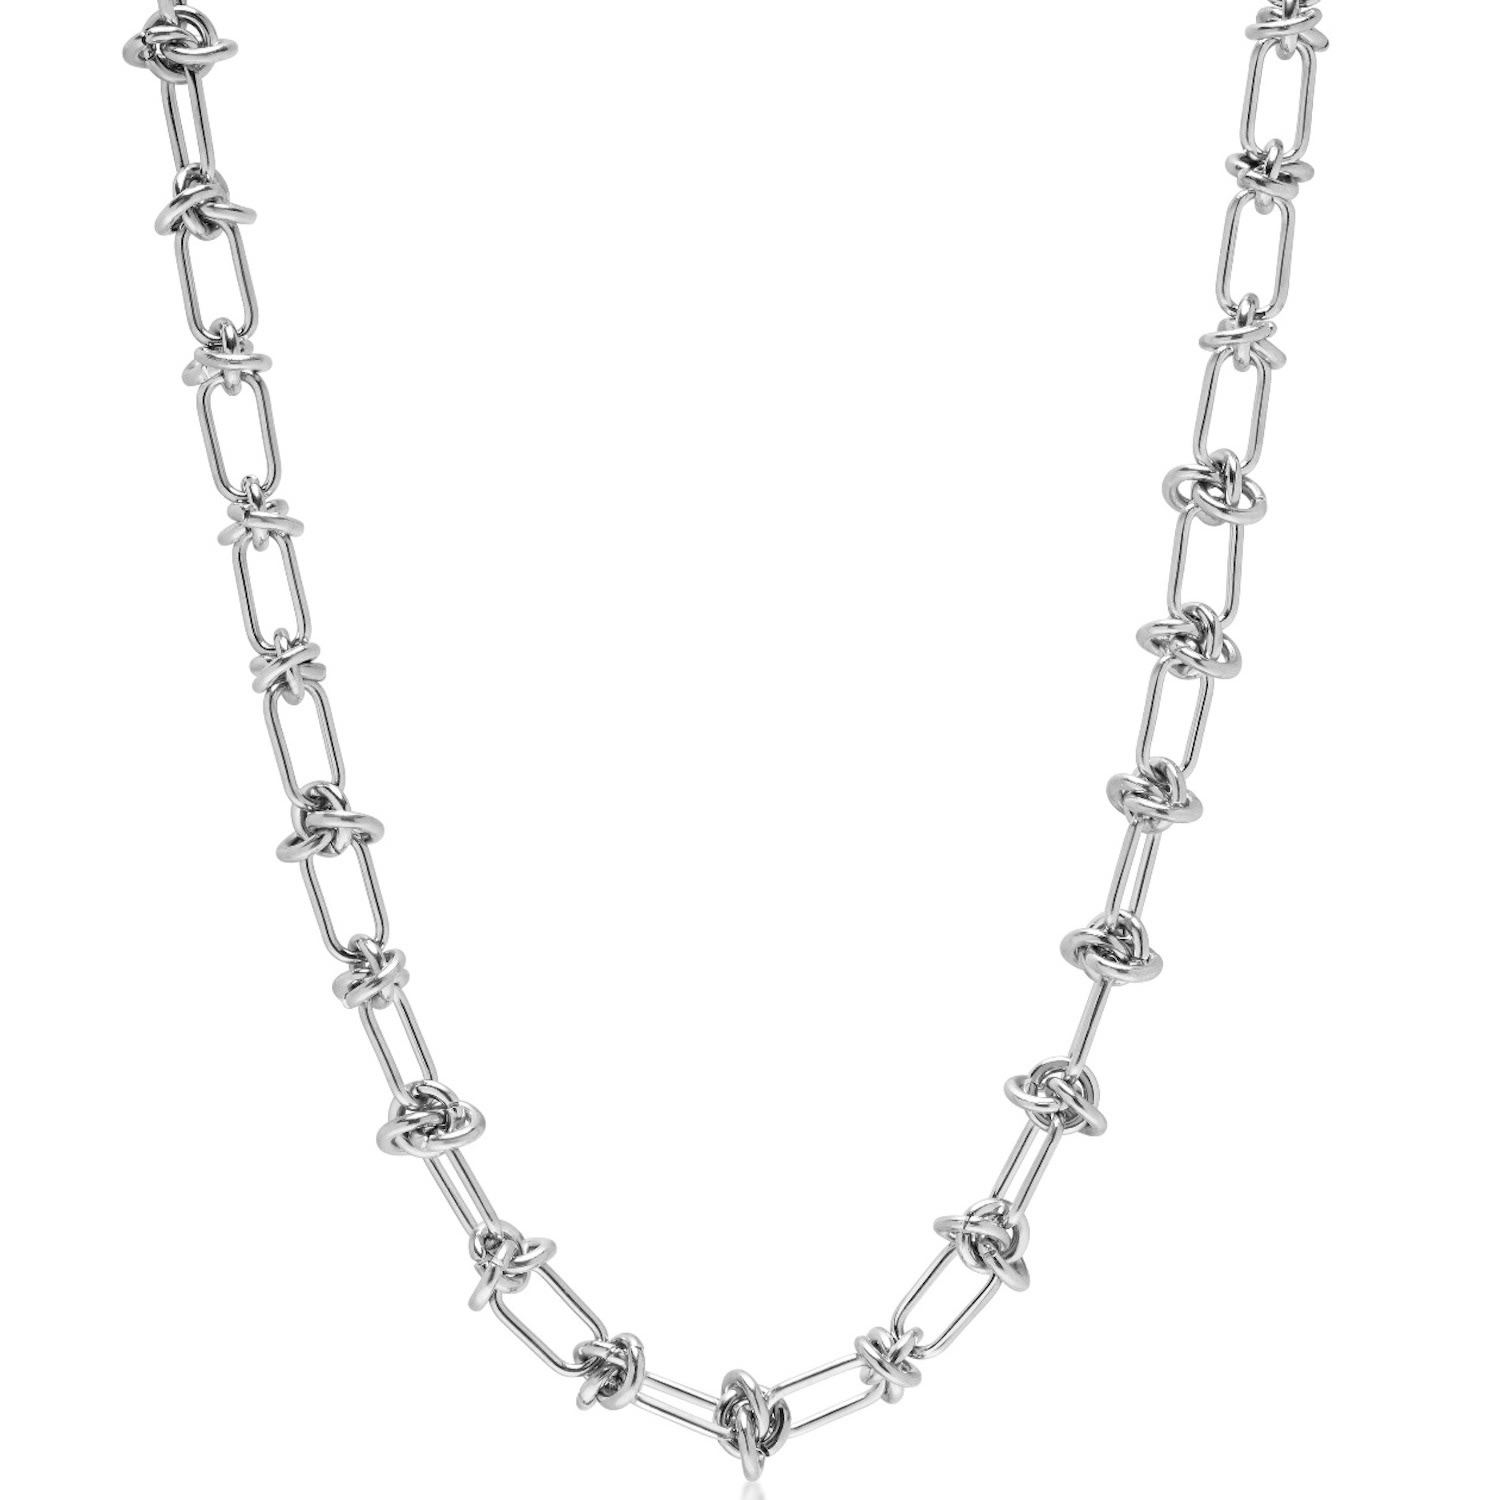 Women’s Silver Barbed Wire Necklace Nialaya